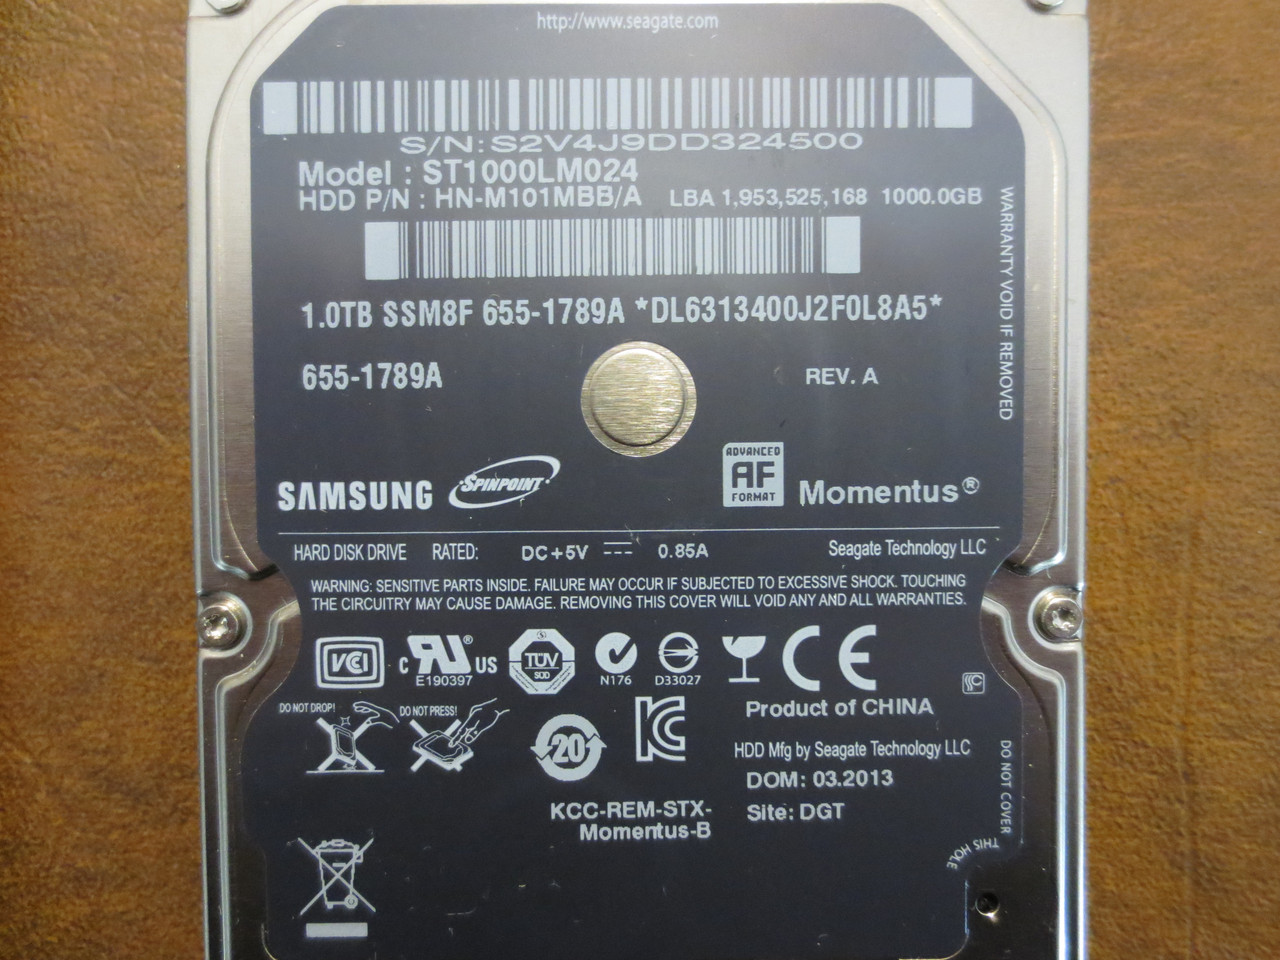 Samsung ST1000LM024 HN-M101MBB/A REV.A Apple#655-1789A 1.0TB Sata (Donor  for Parts) - Effective Electronics